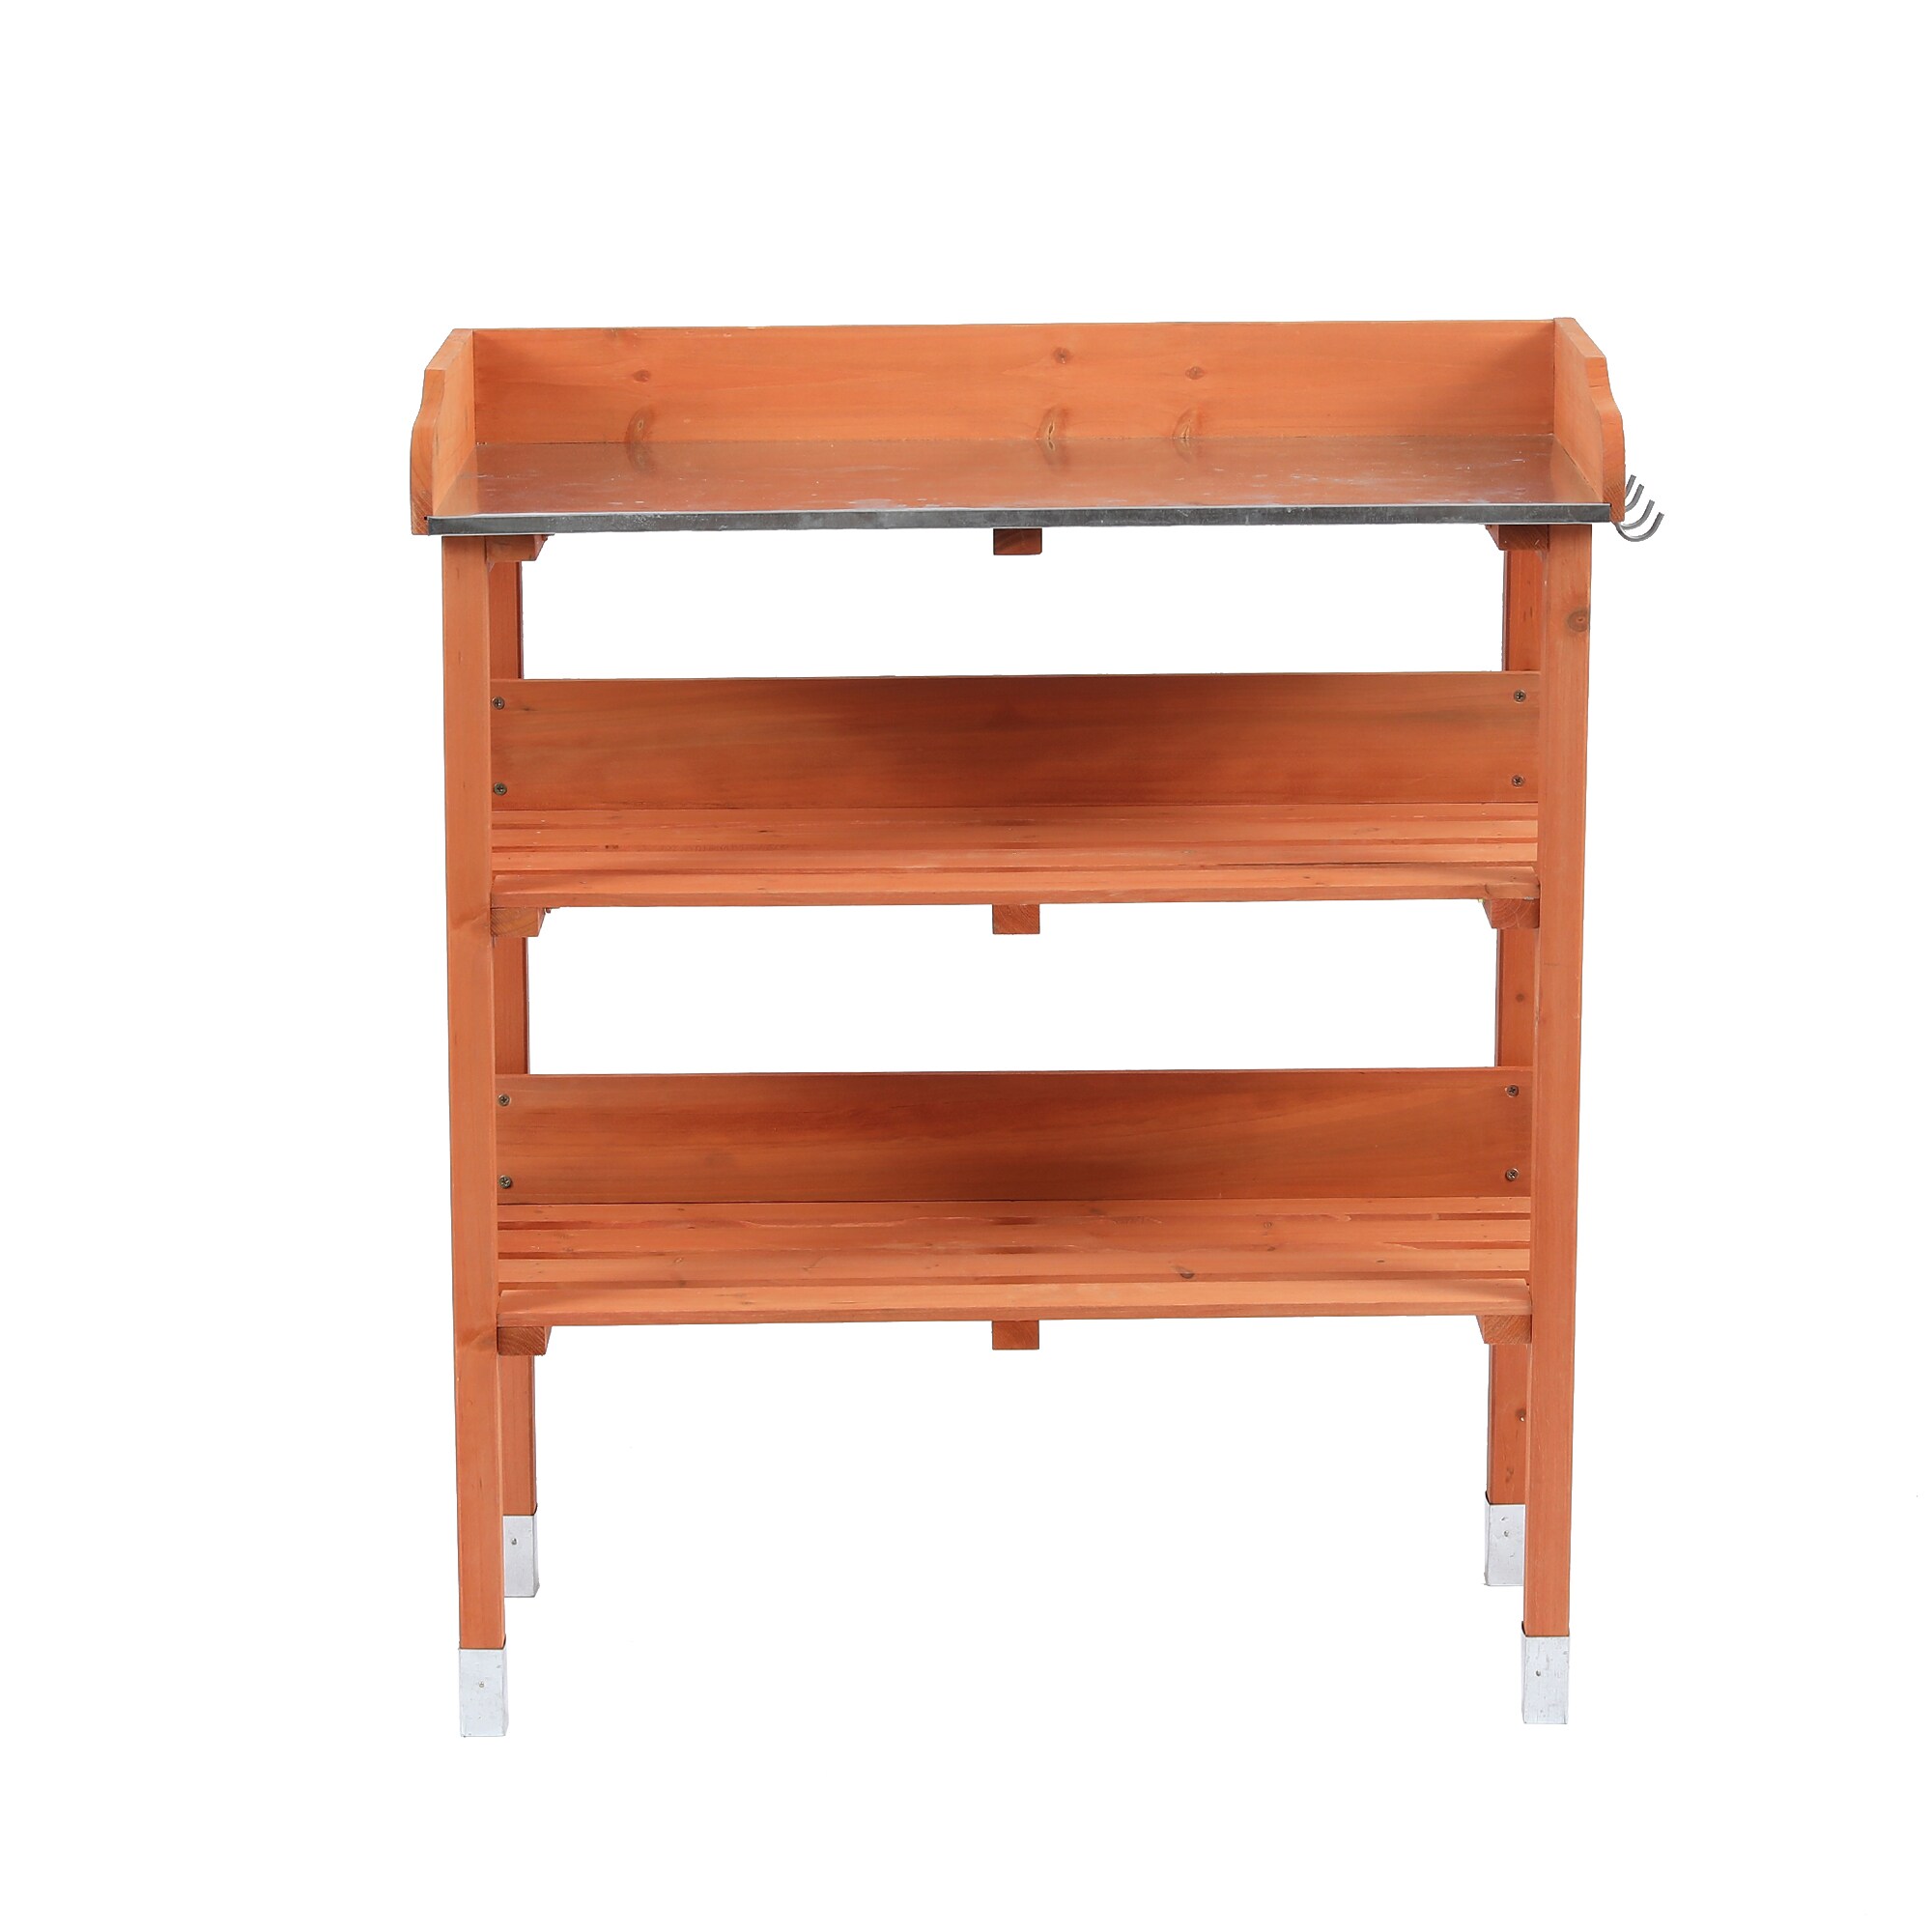 Cypress Wood Potting Bench with Metal Top and Storage to Hold All of Your Gardening Tools 